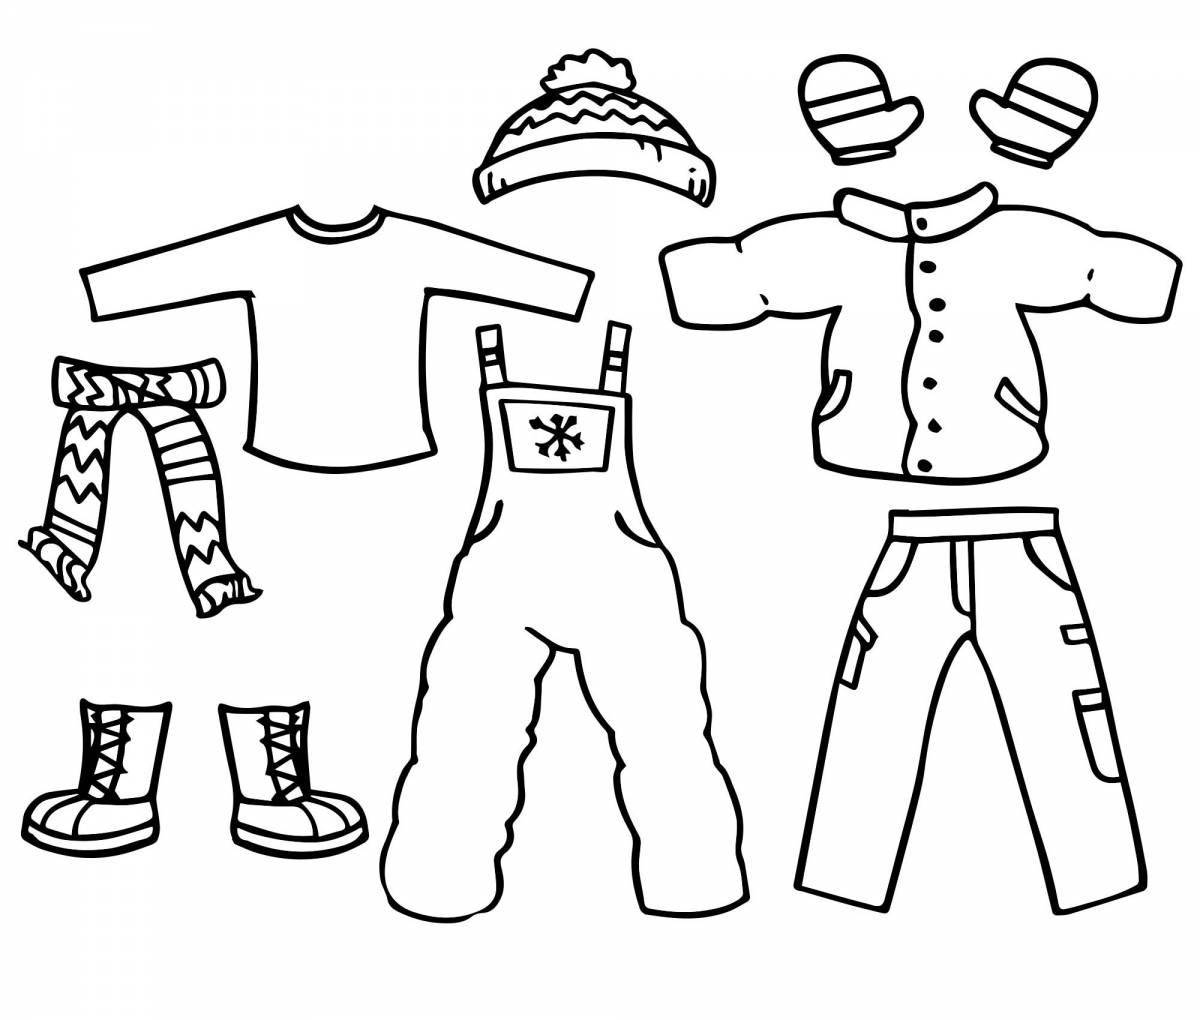 Playful winter clothes coloring page